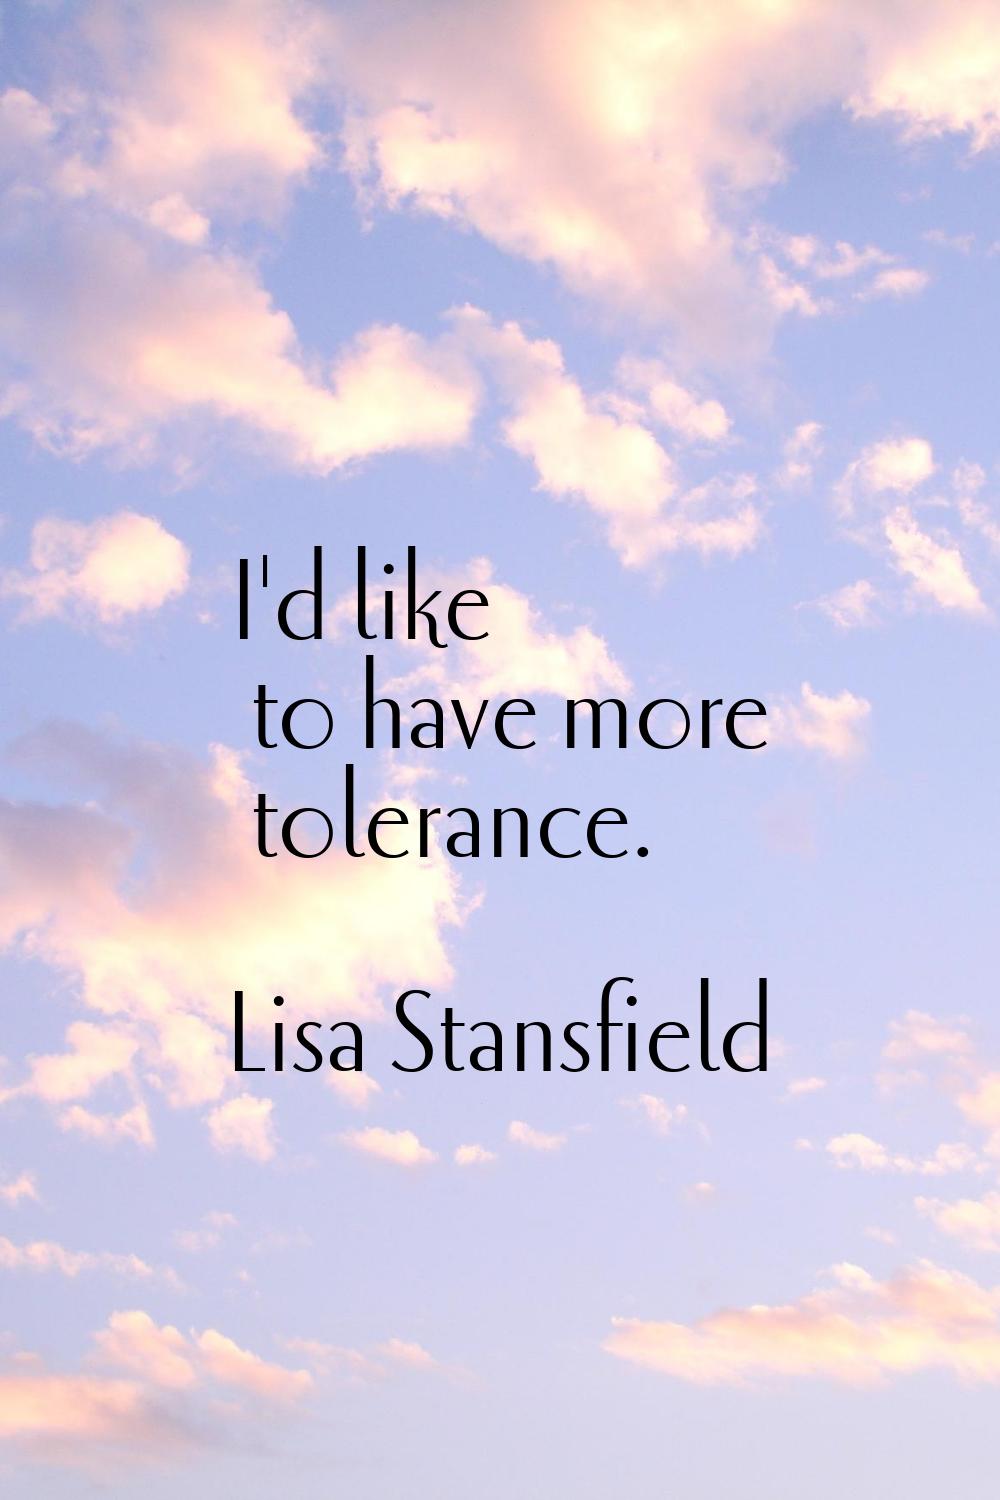 I'd like to have more tolerance.